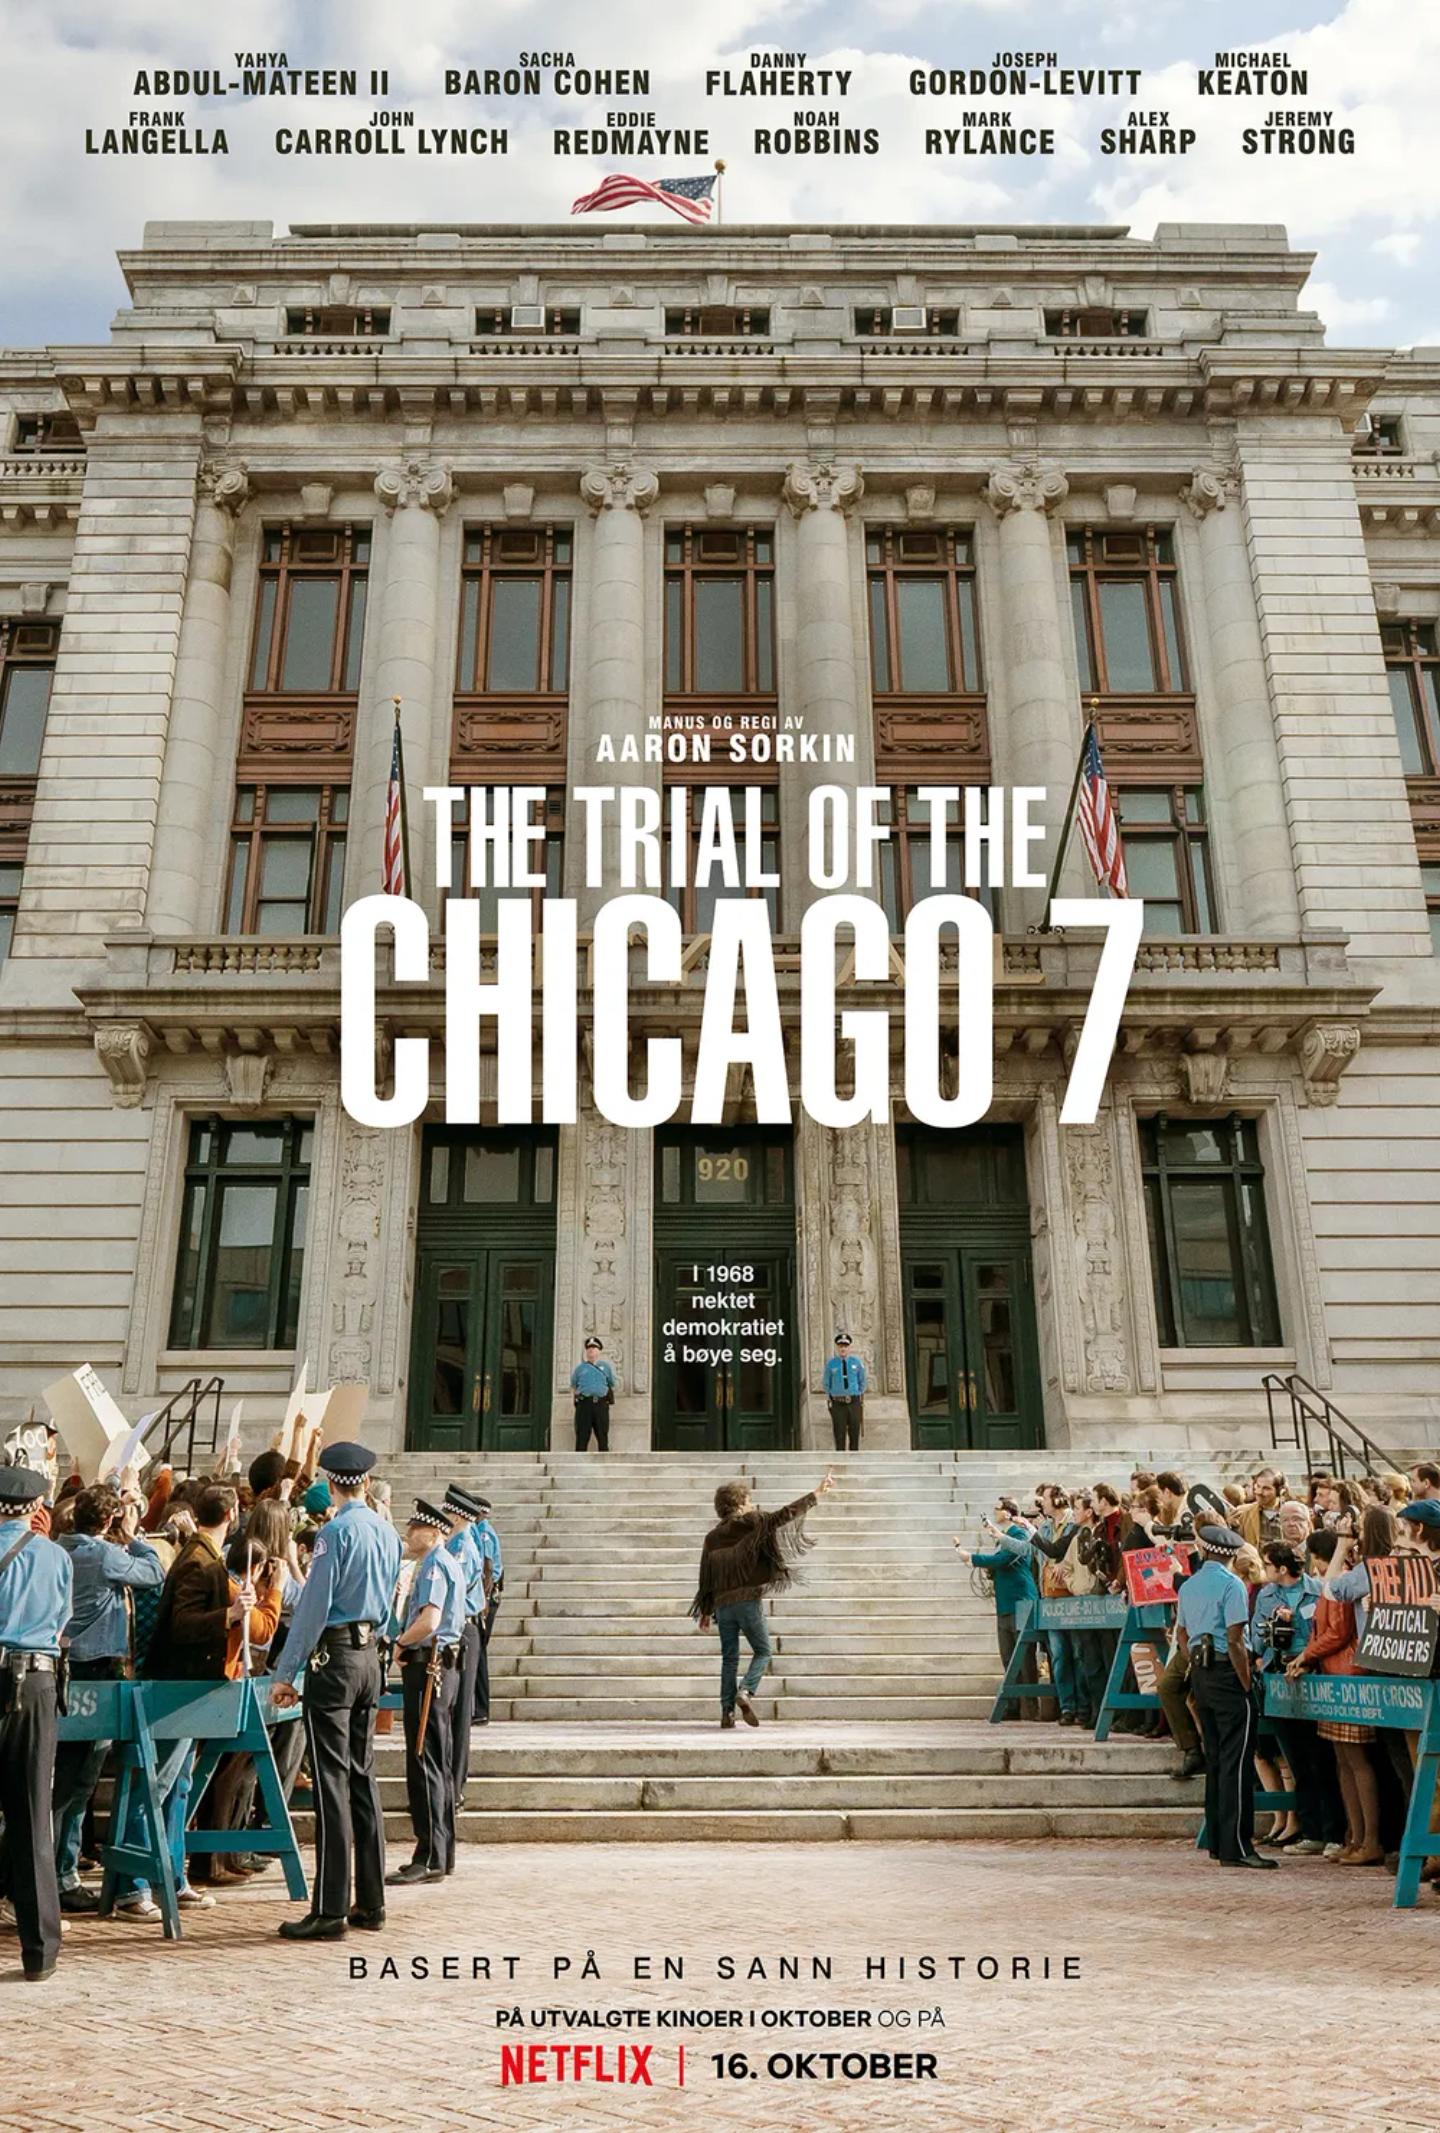 Plakat for 'The Trial of the Chicago 7'